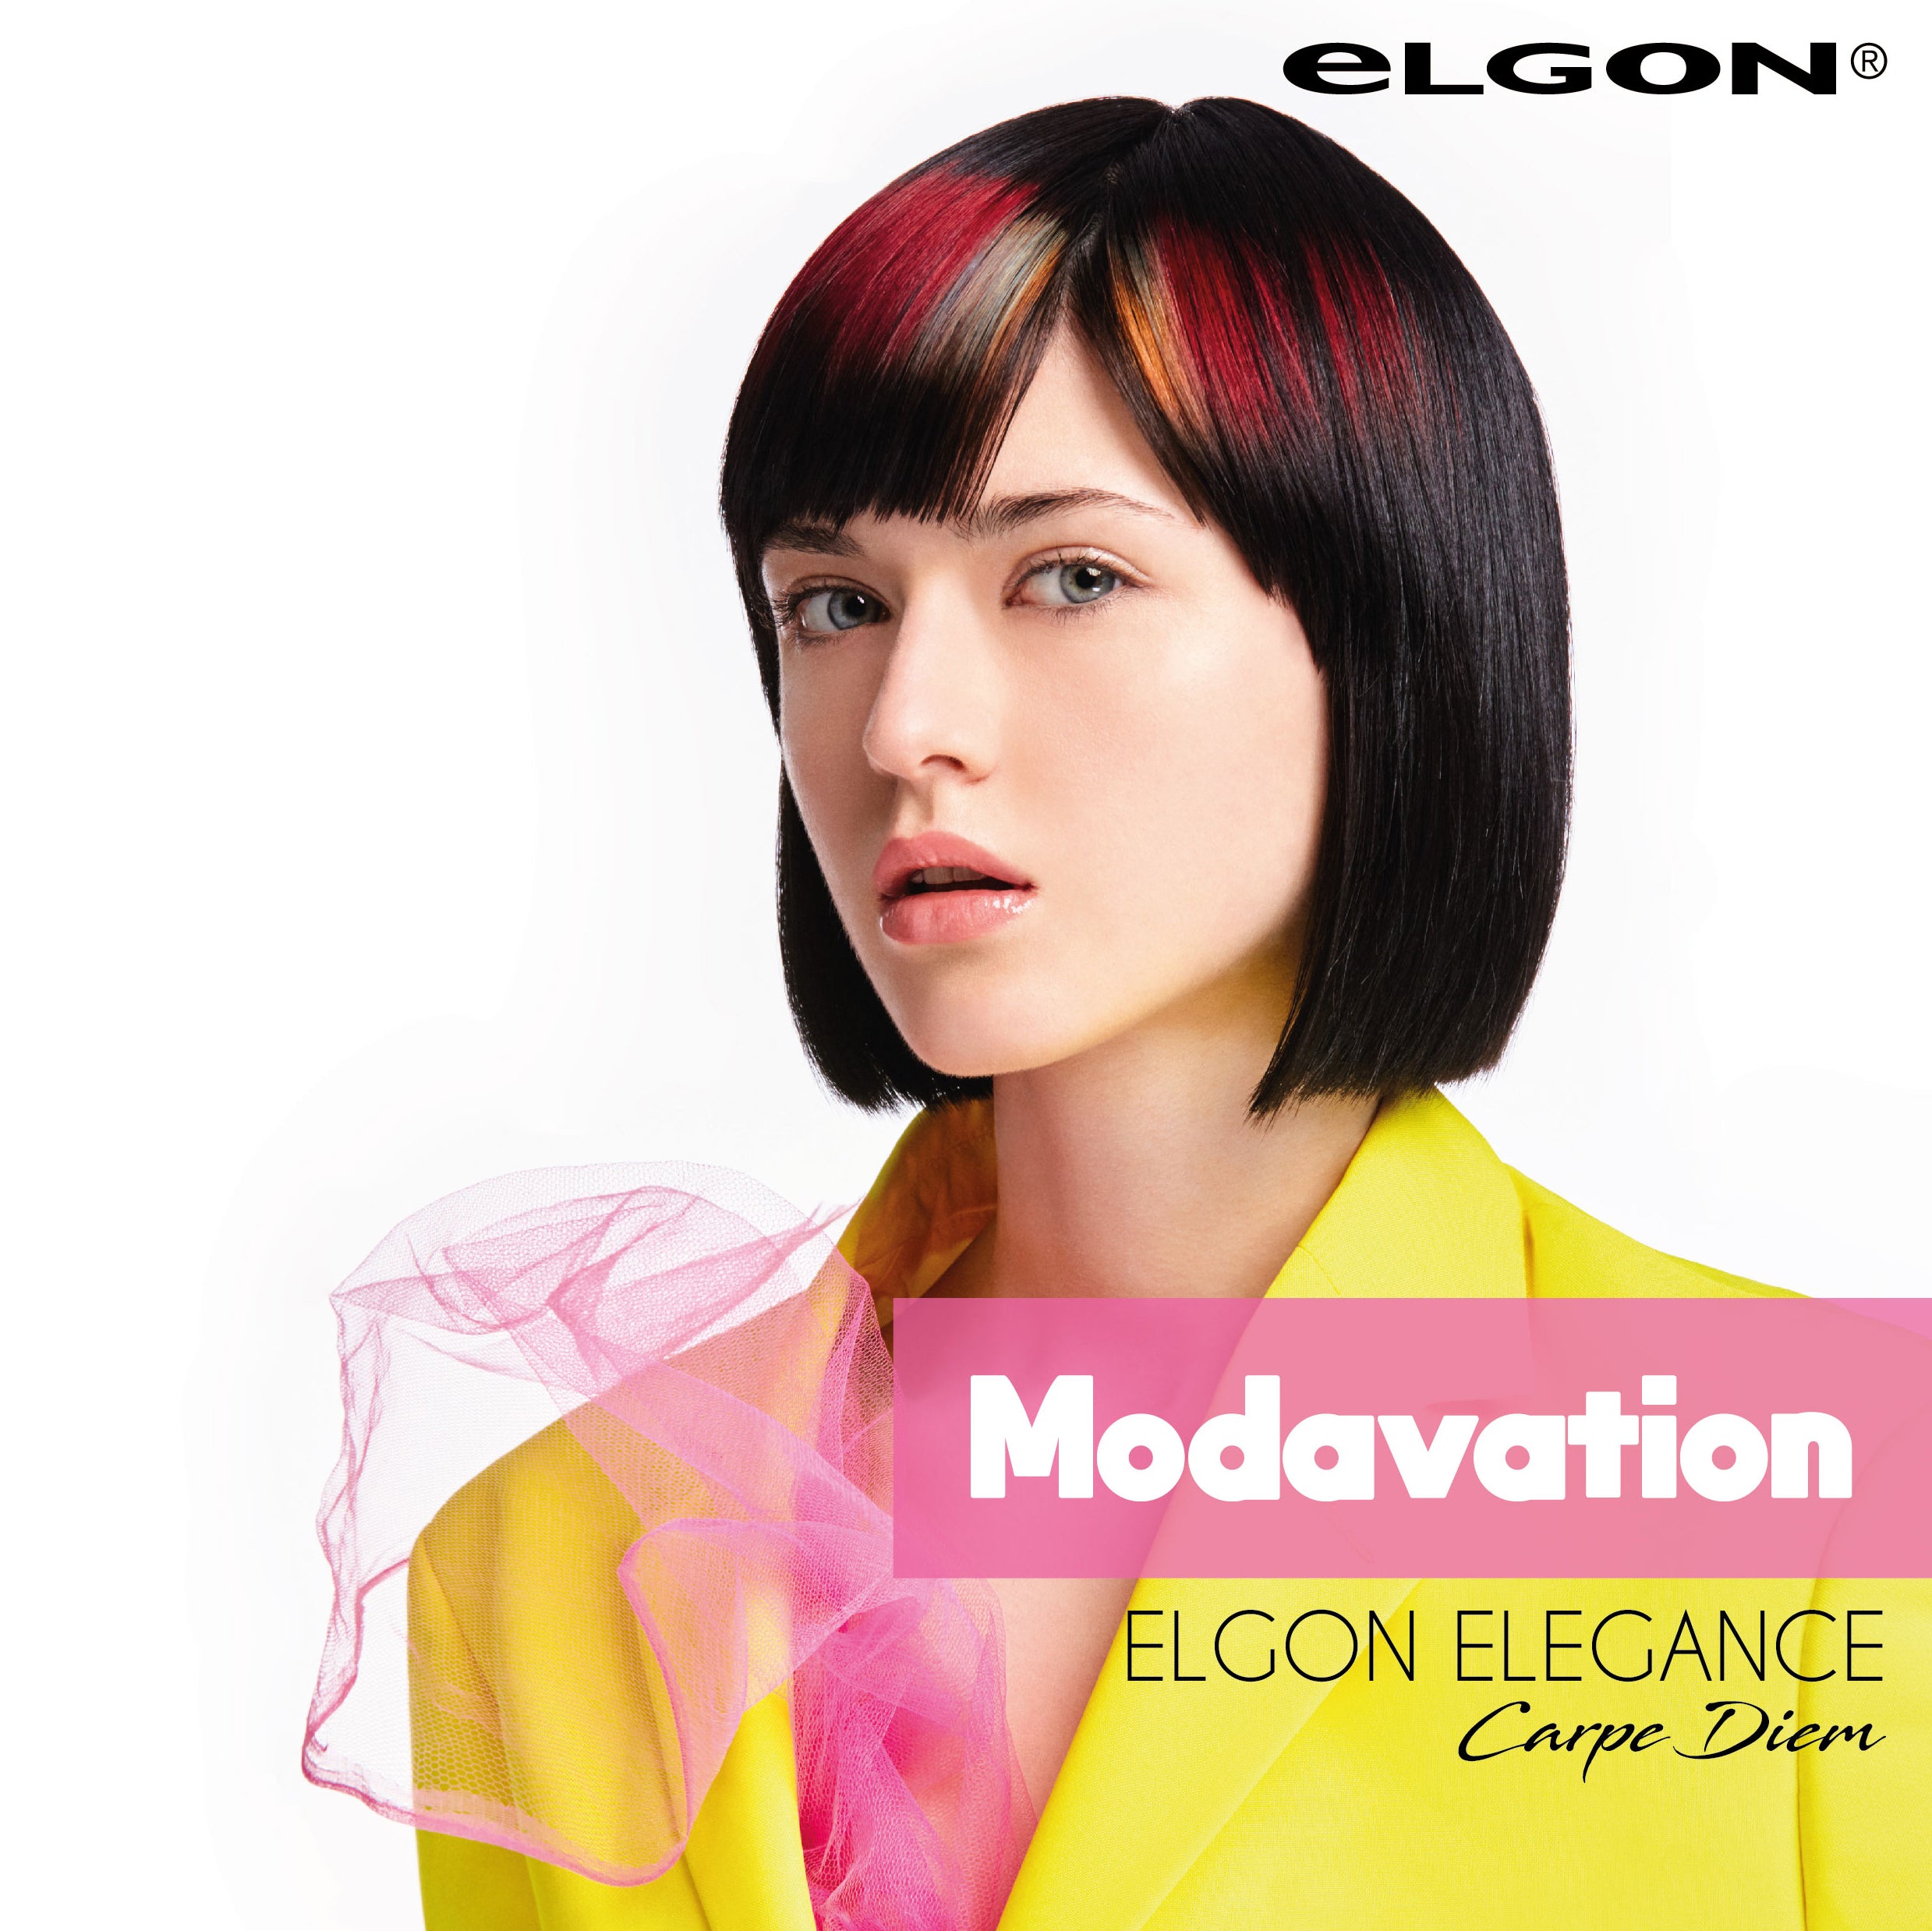 Two Elgon hair products to fall in love